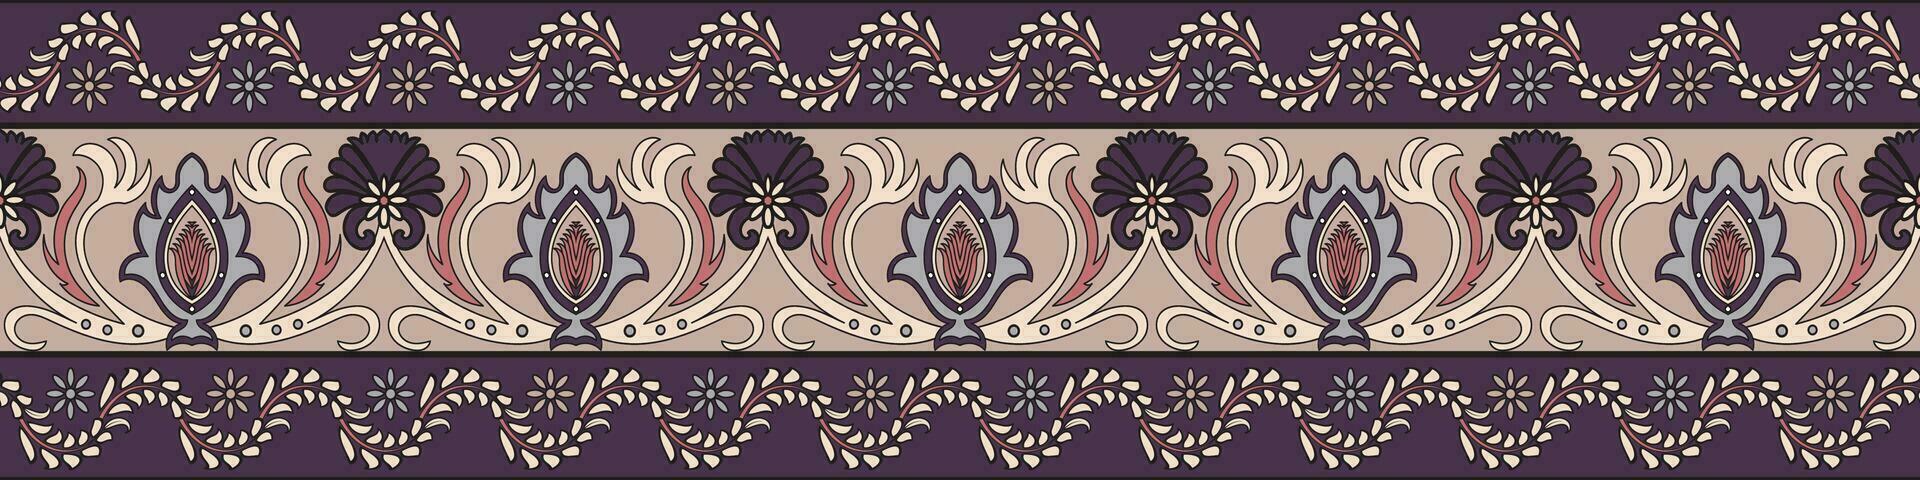 Abstract border. original vintage pattern Ethnic tribes. Seamless. Hand drawn quilling flowers. Carpet Borders, Woven Fabrics, Book Covers vector